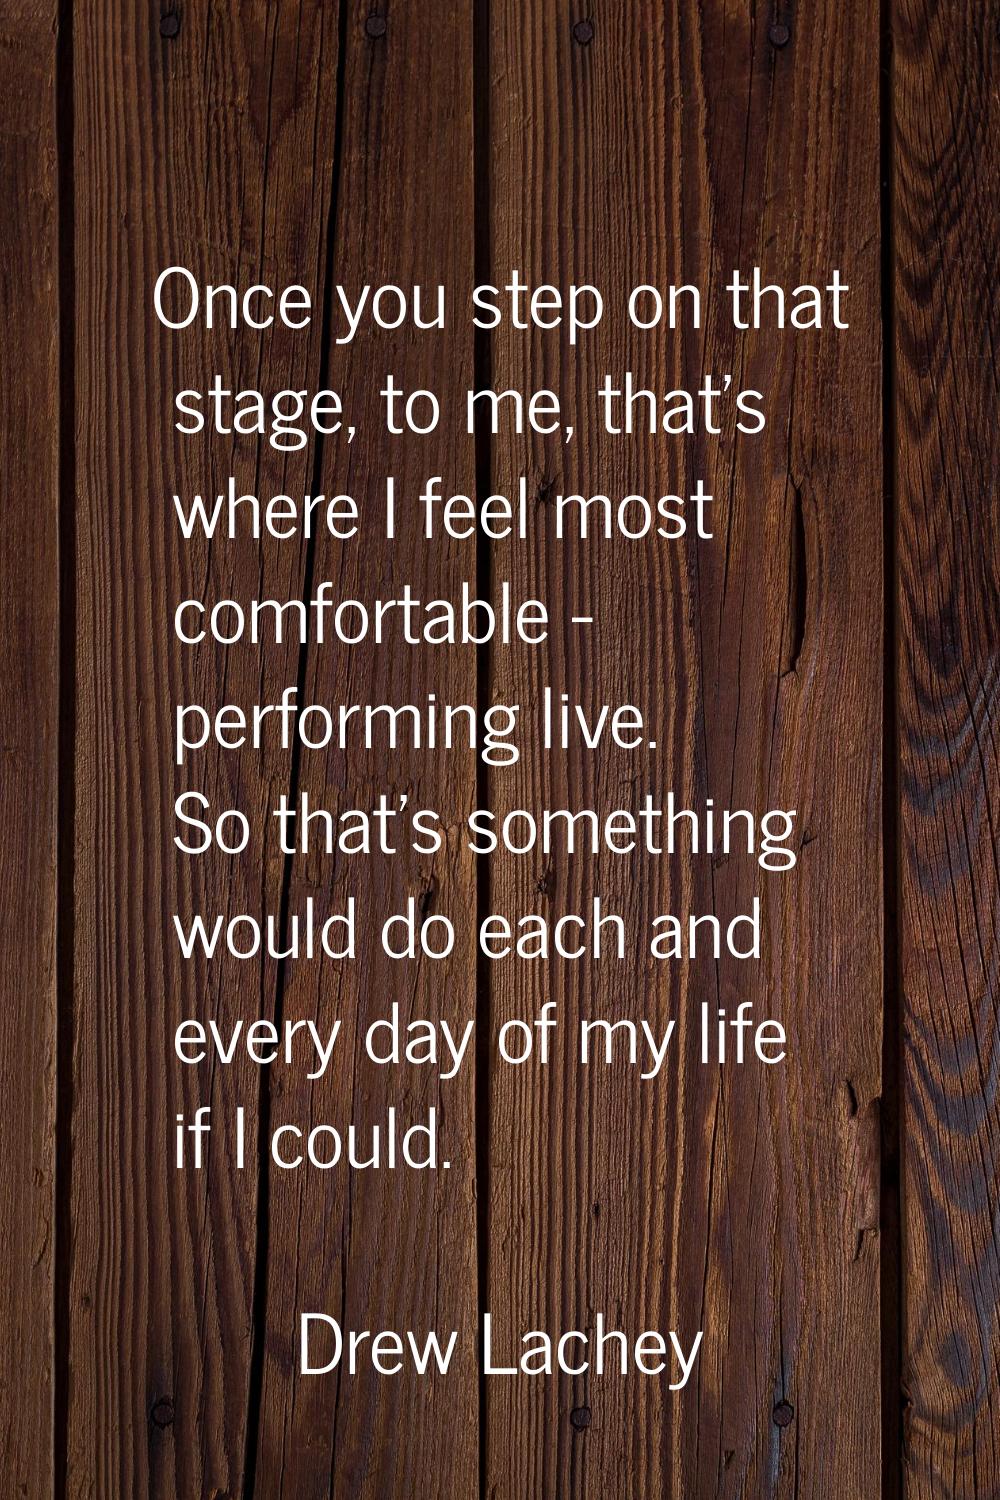 Once you step on that stage, to me, that's where I feel most comfortable - performing live. So that